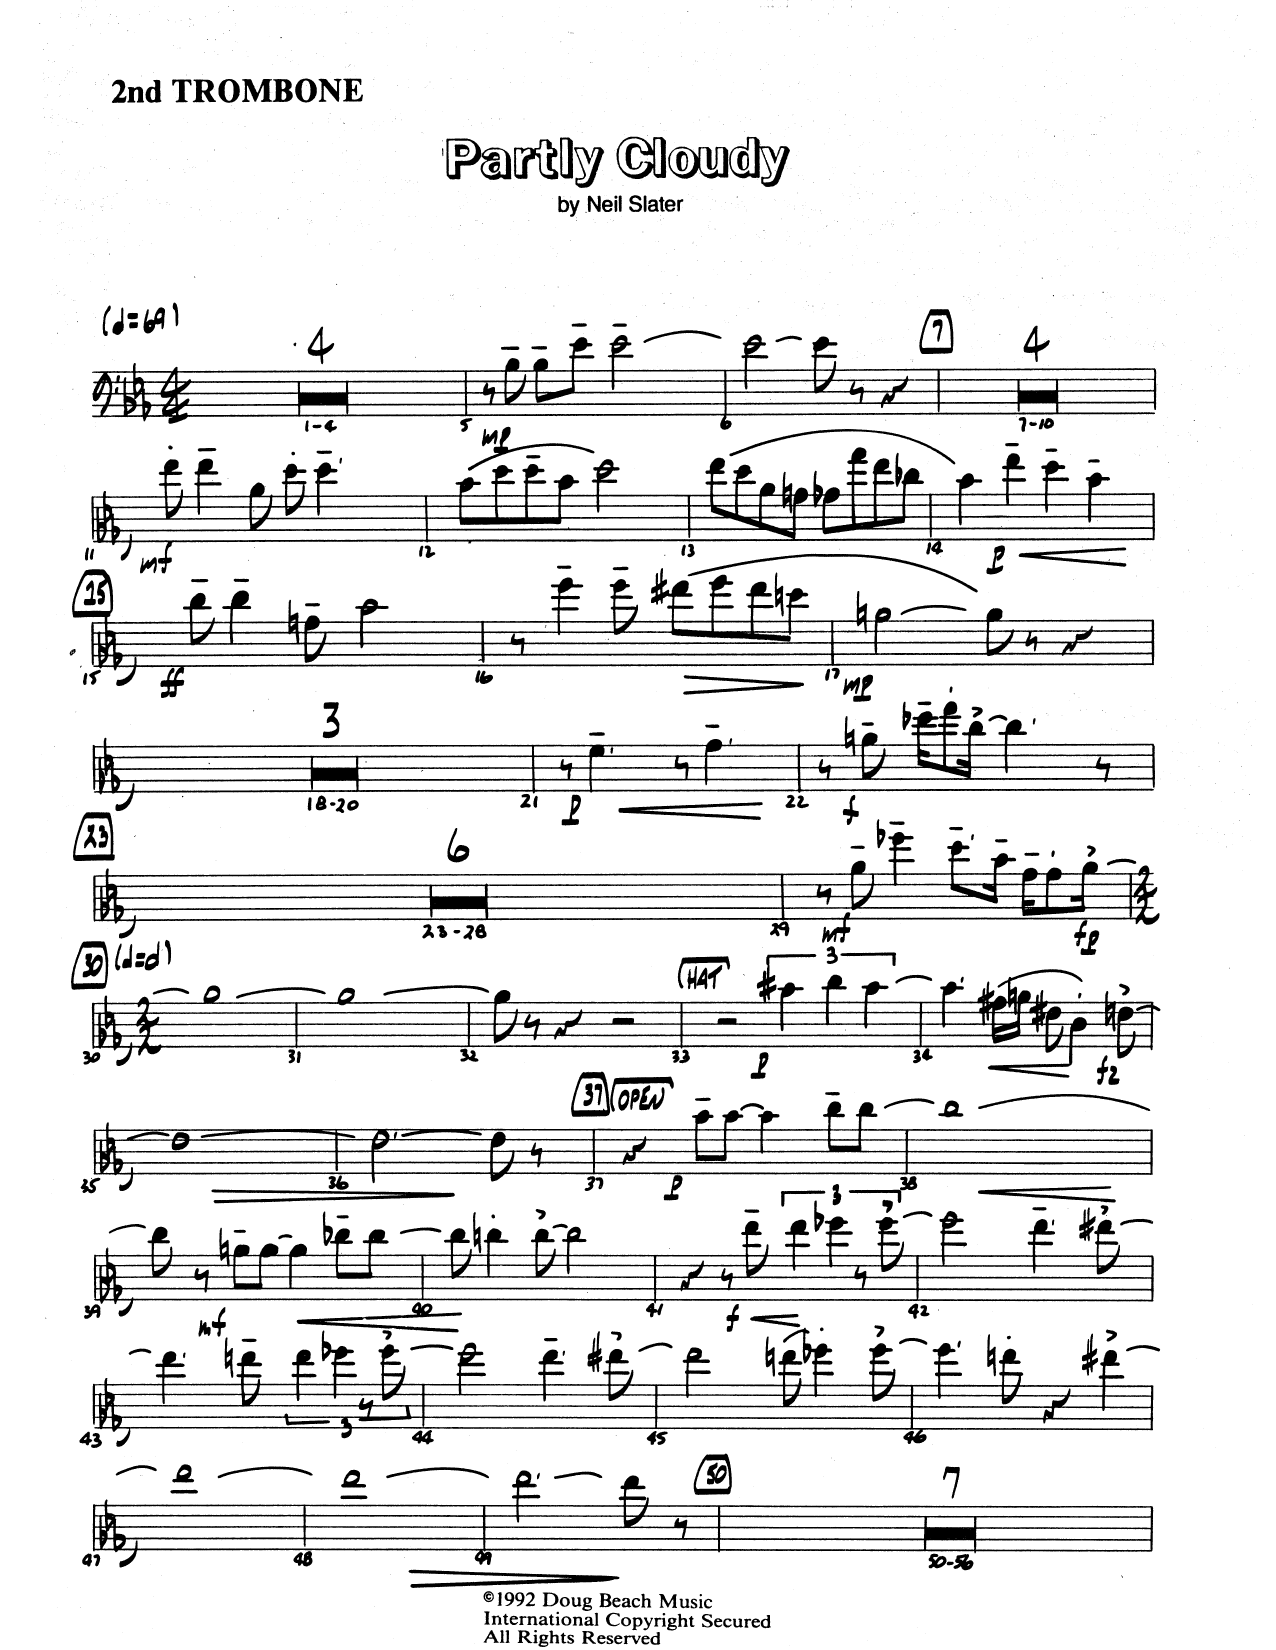 Download Neil Slater Partly Cloudy - 2nd Trombone Sheet Music